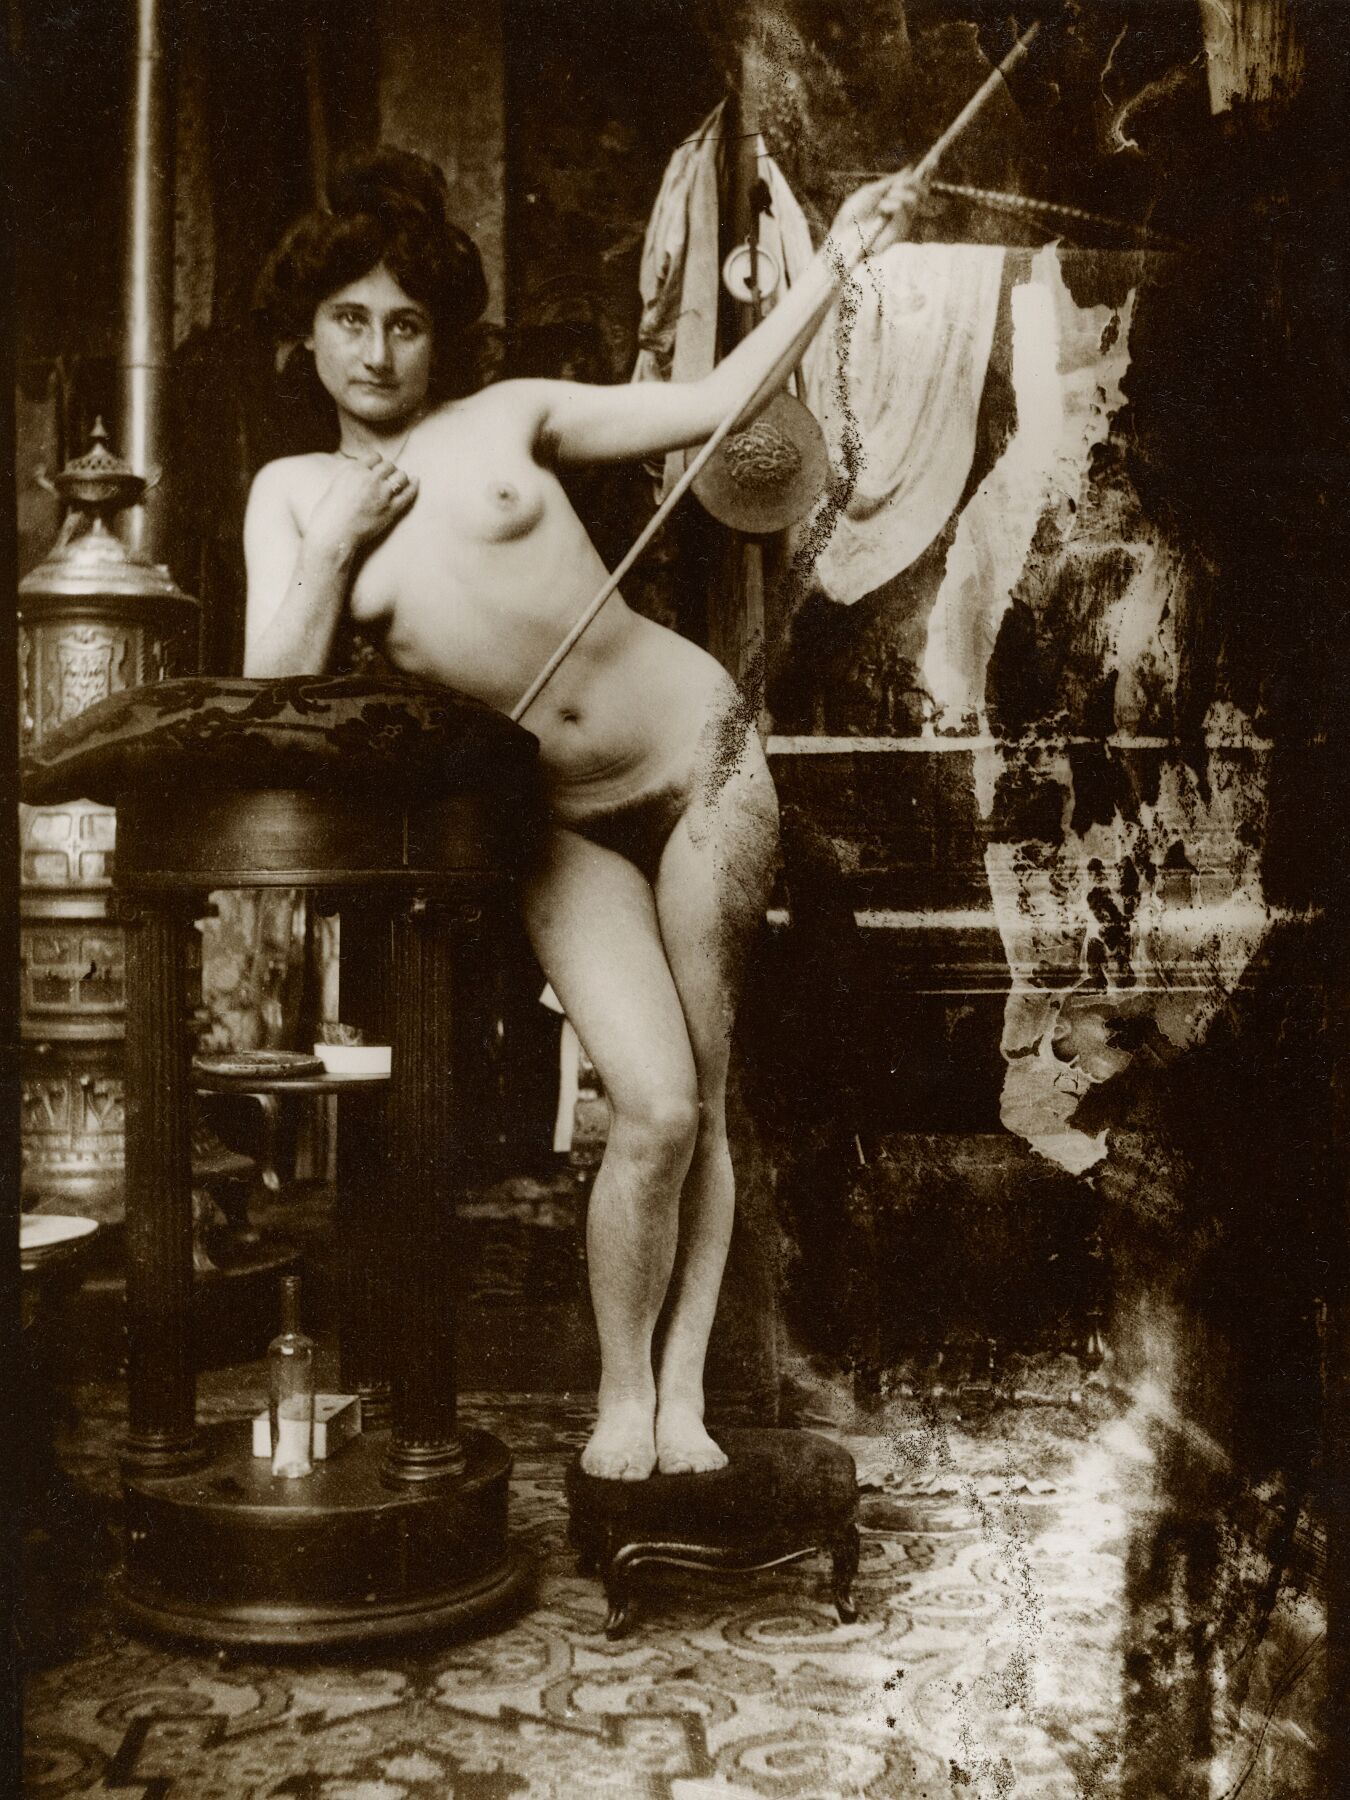 Female Nude with a Spear, Paris by Alphonse Maria Mucha - 1899